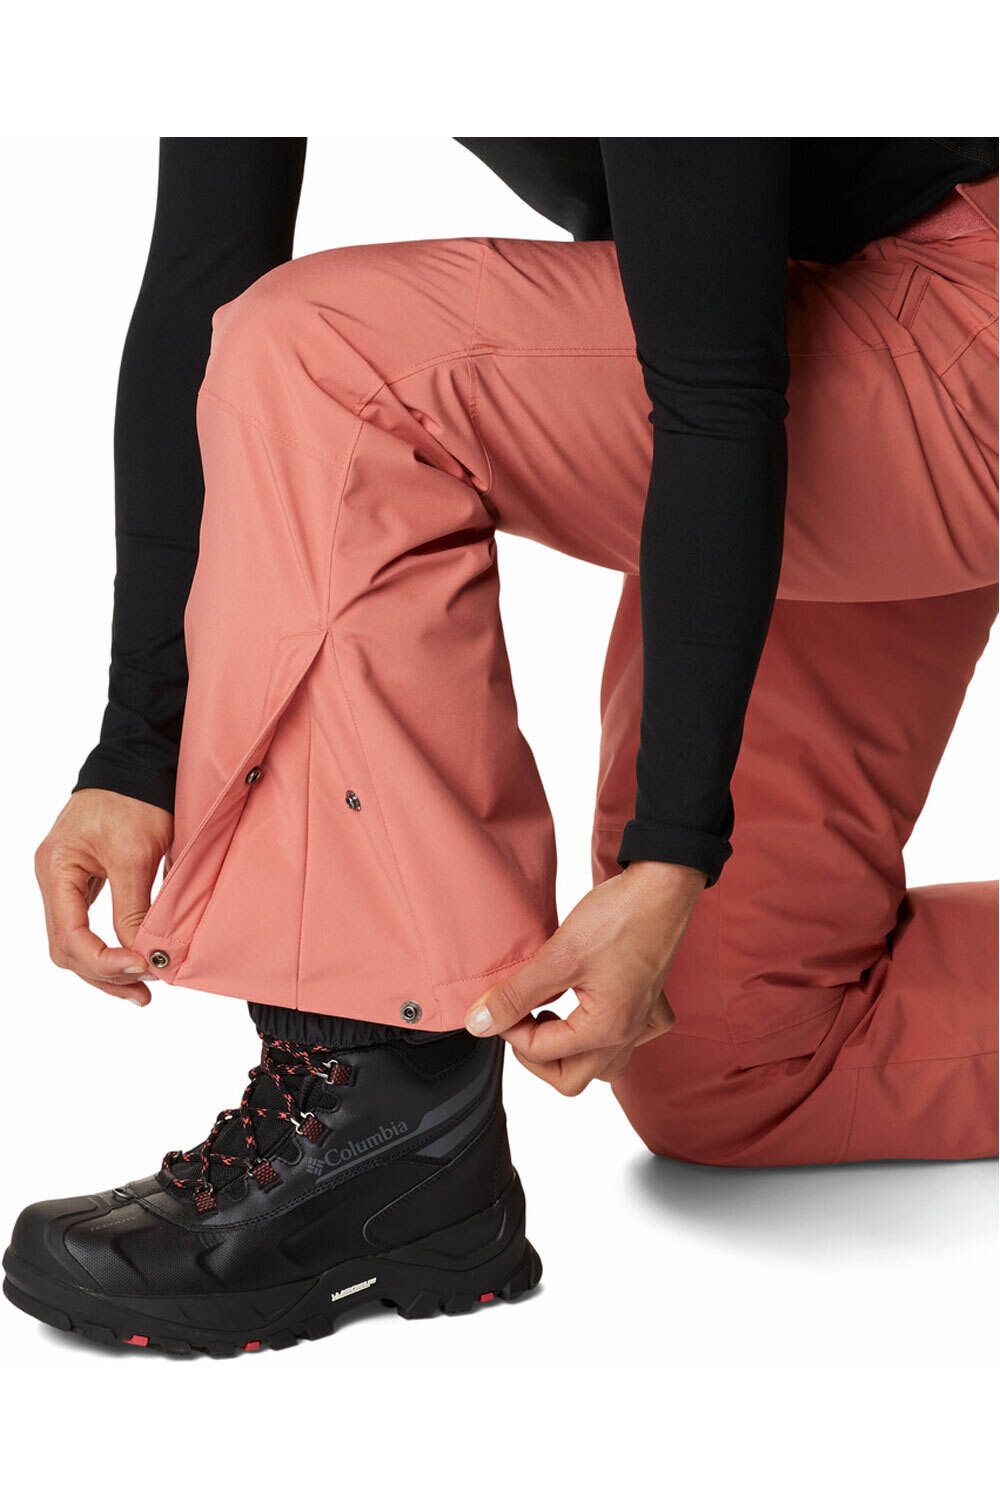 Columbia pantalones esquí mujer SHAFER CANYON INSULATED PANT 06